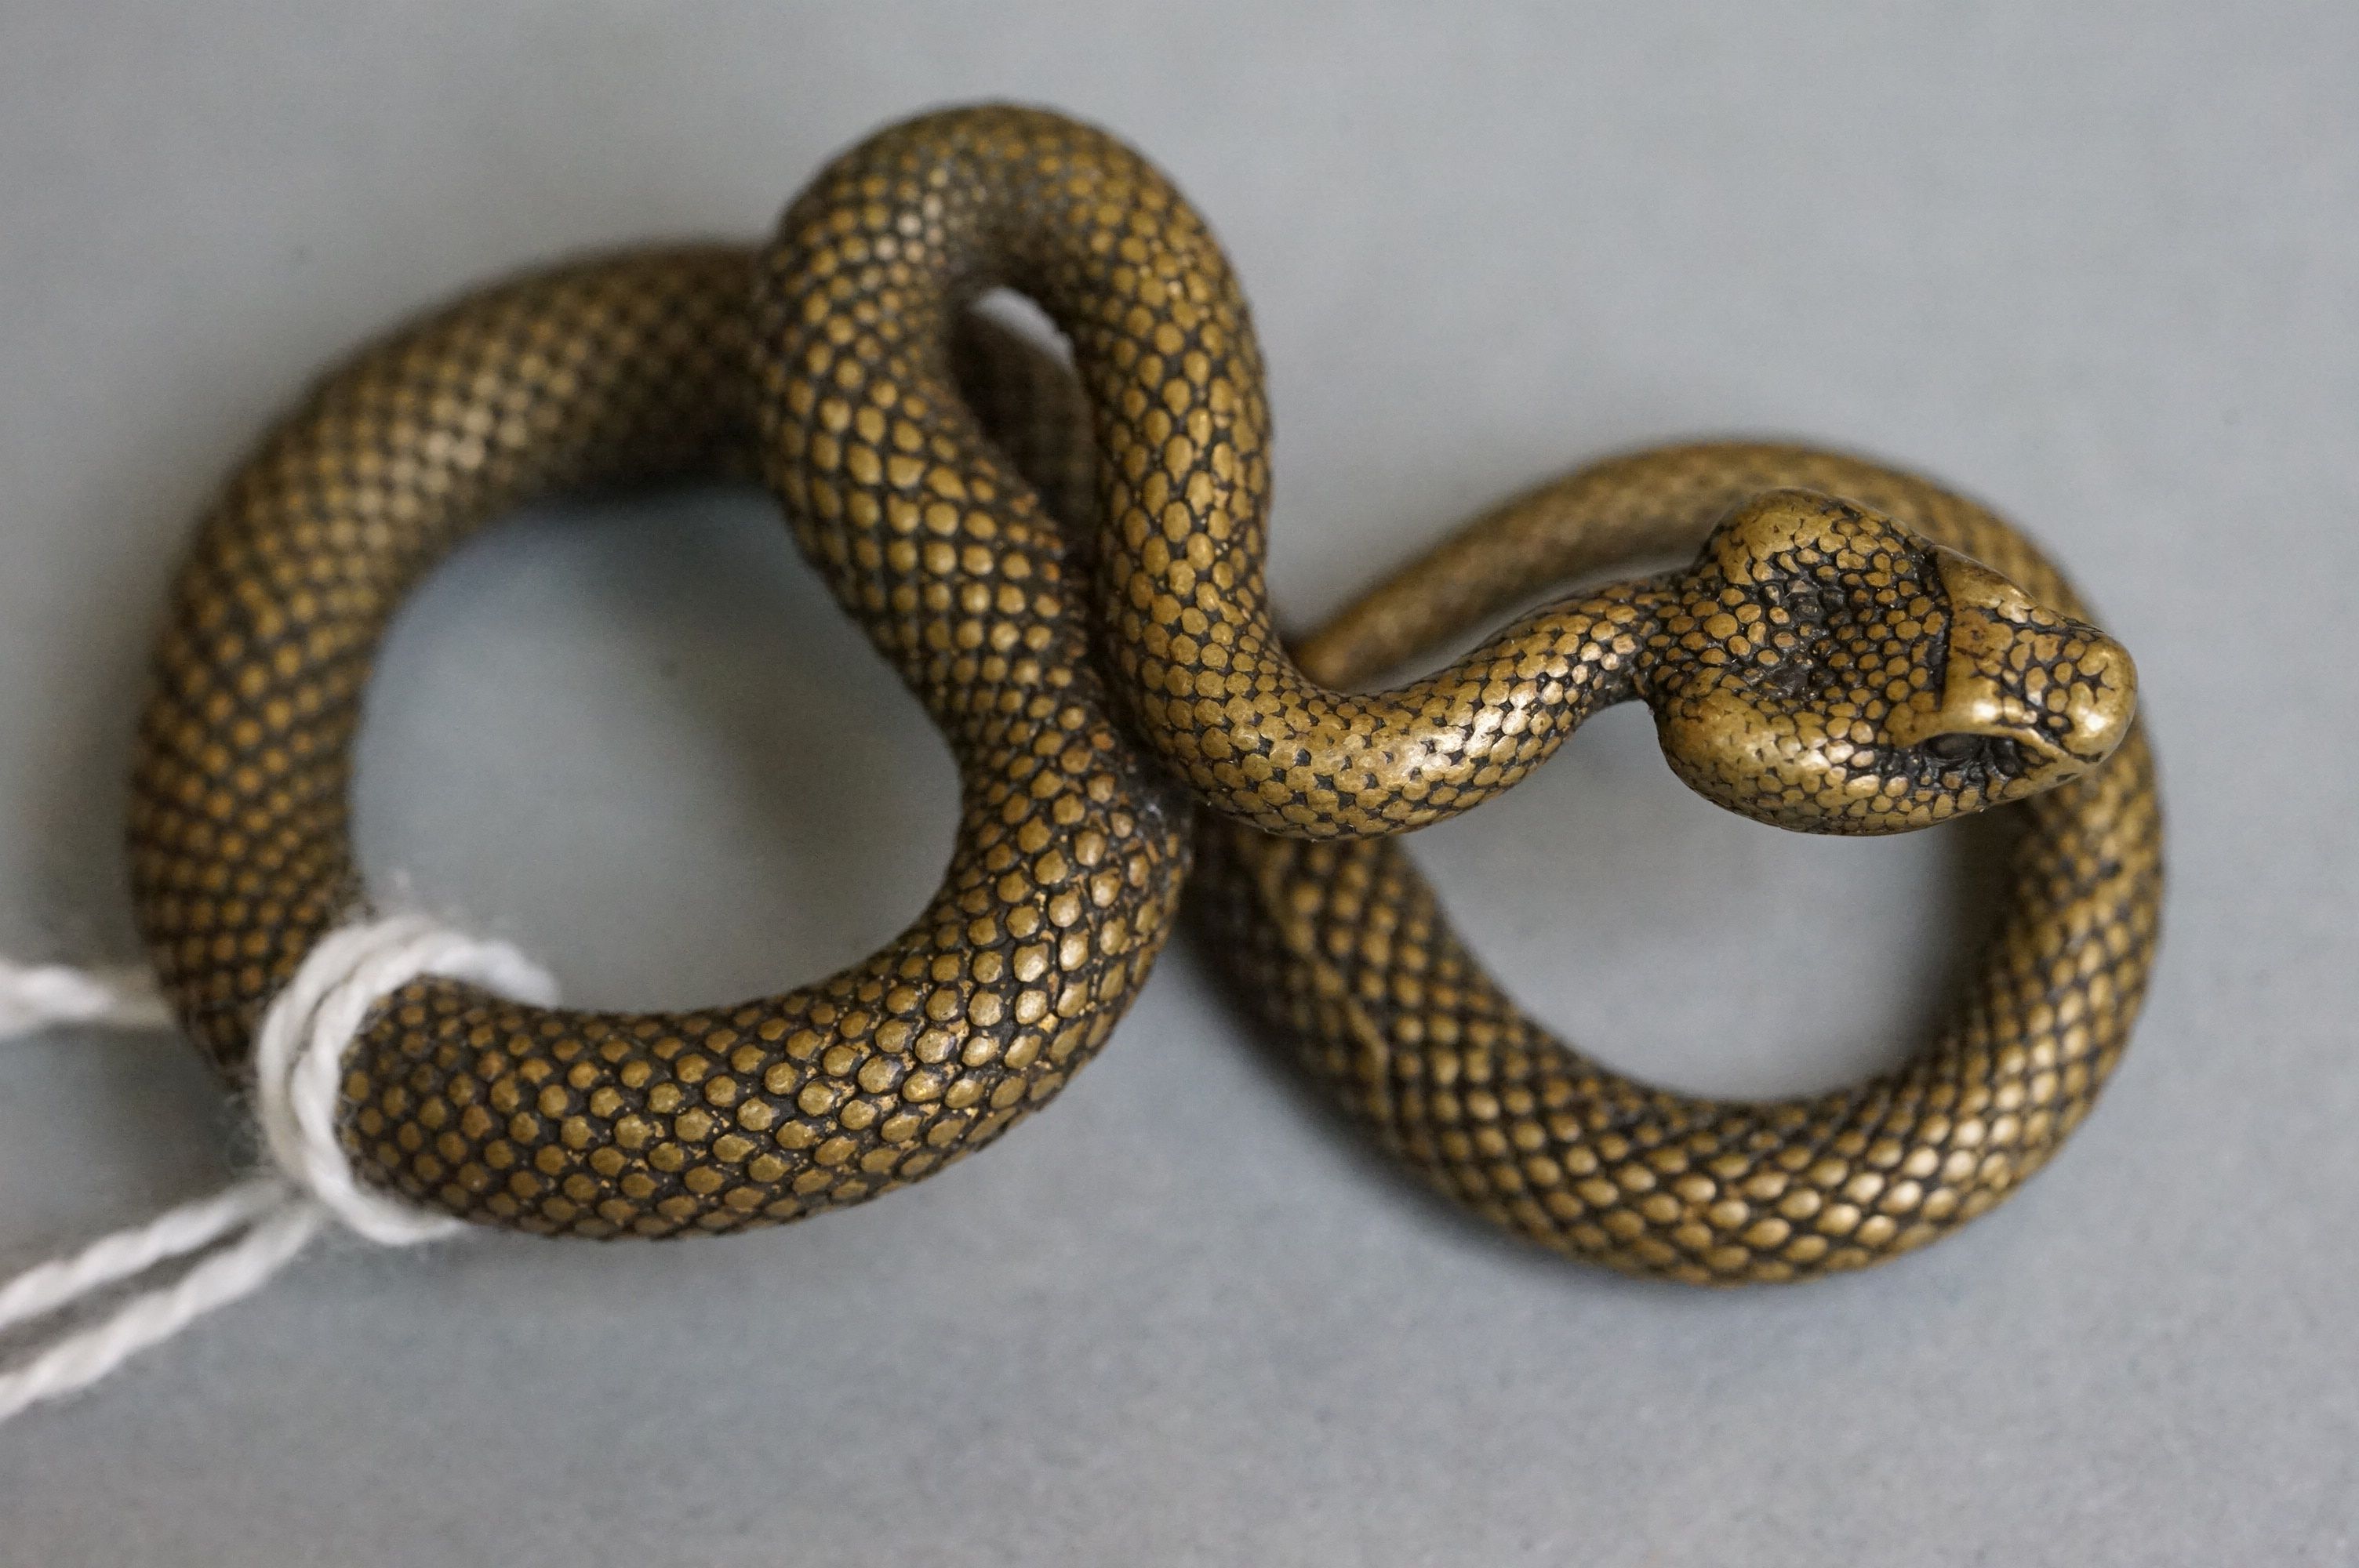 A small metal figure of a viper snake. - Image 2 of 4